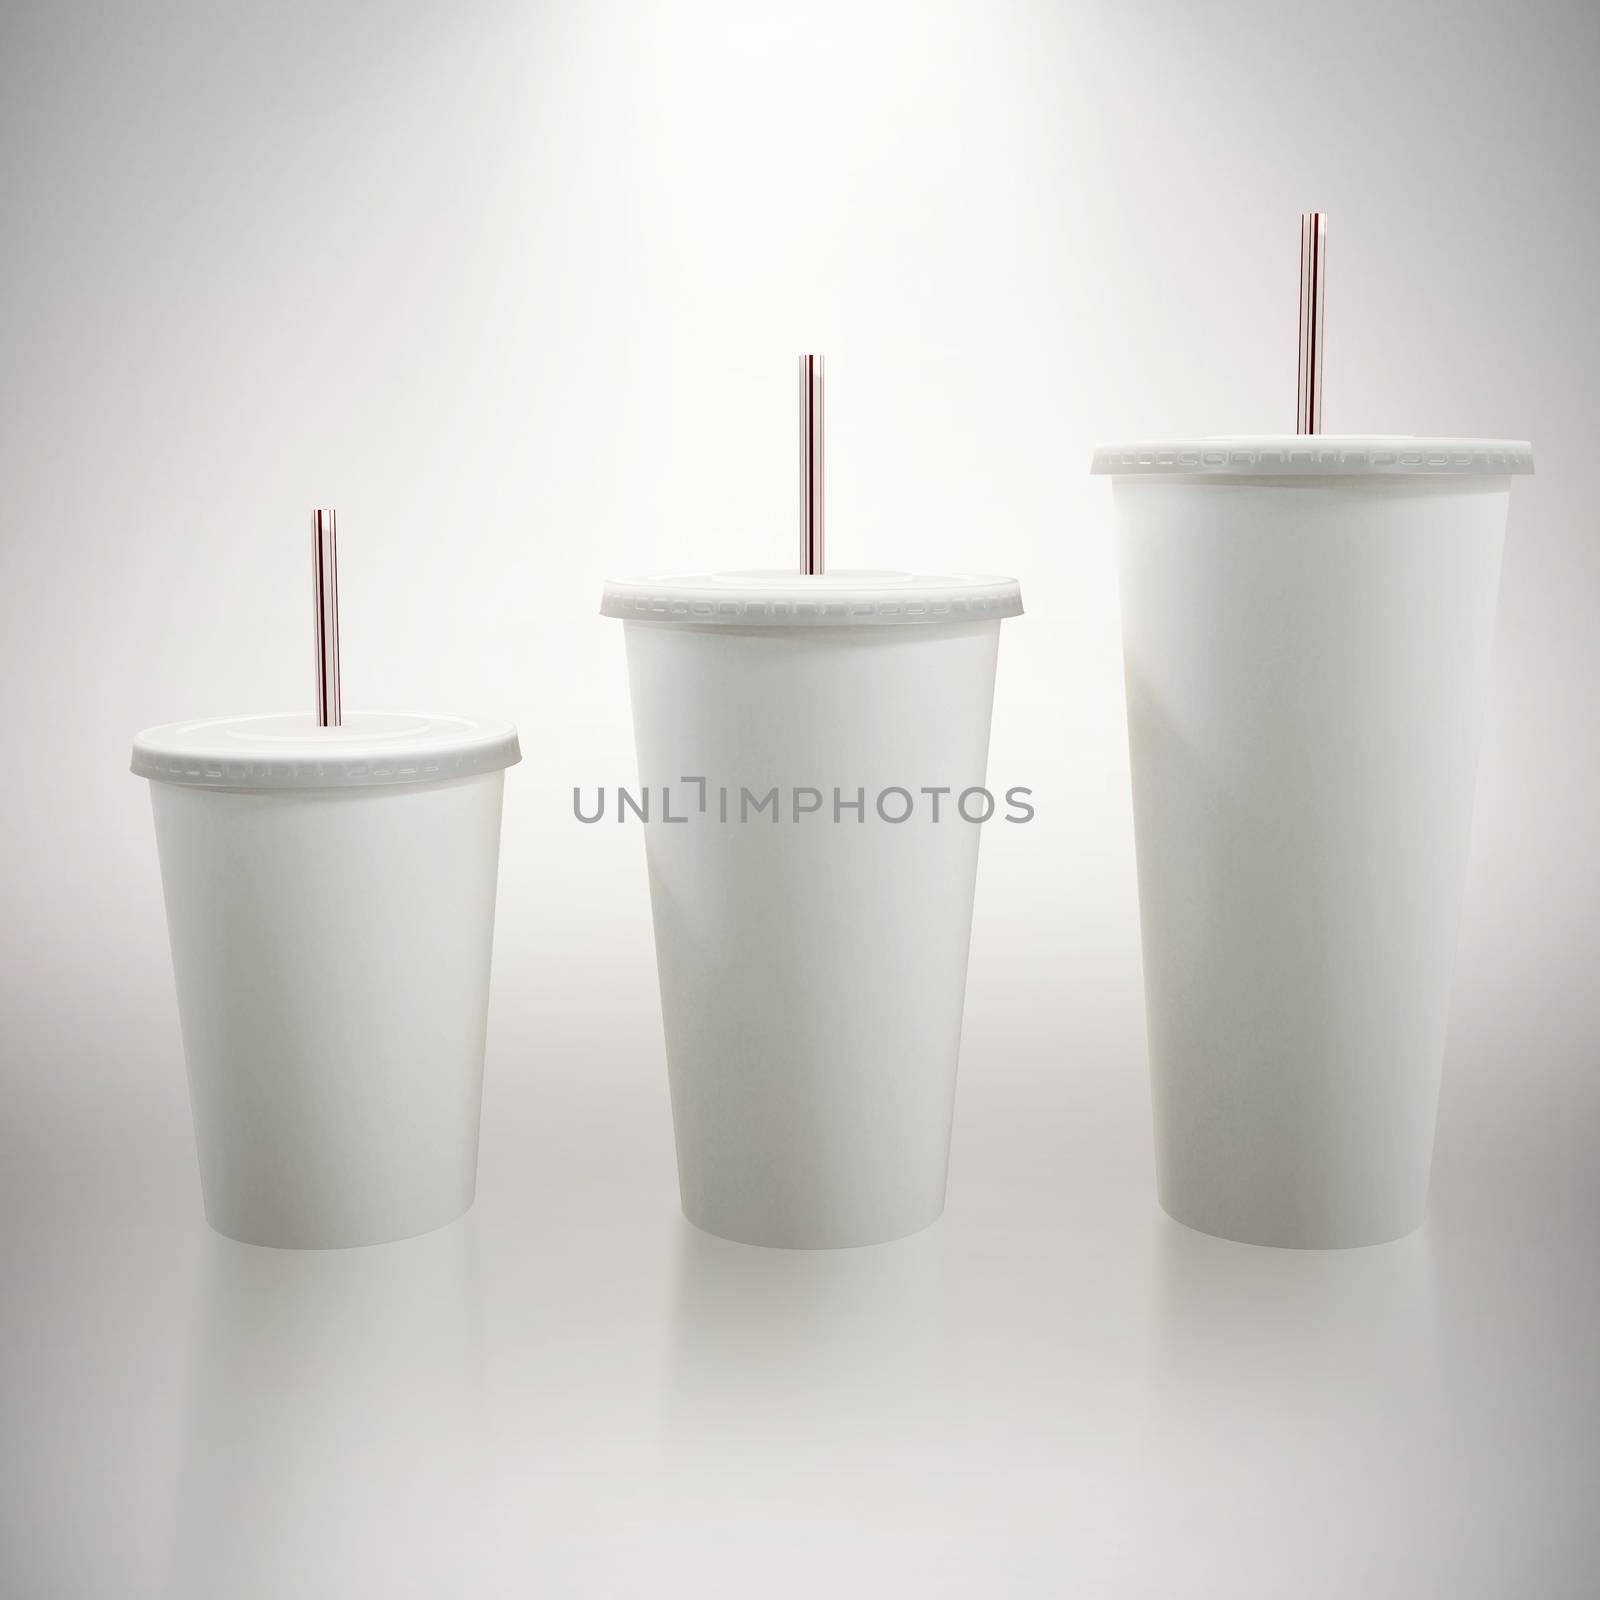 White cups over white background against grey background